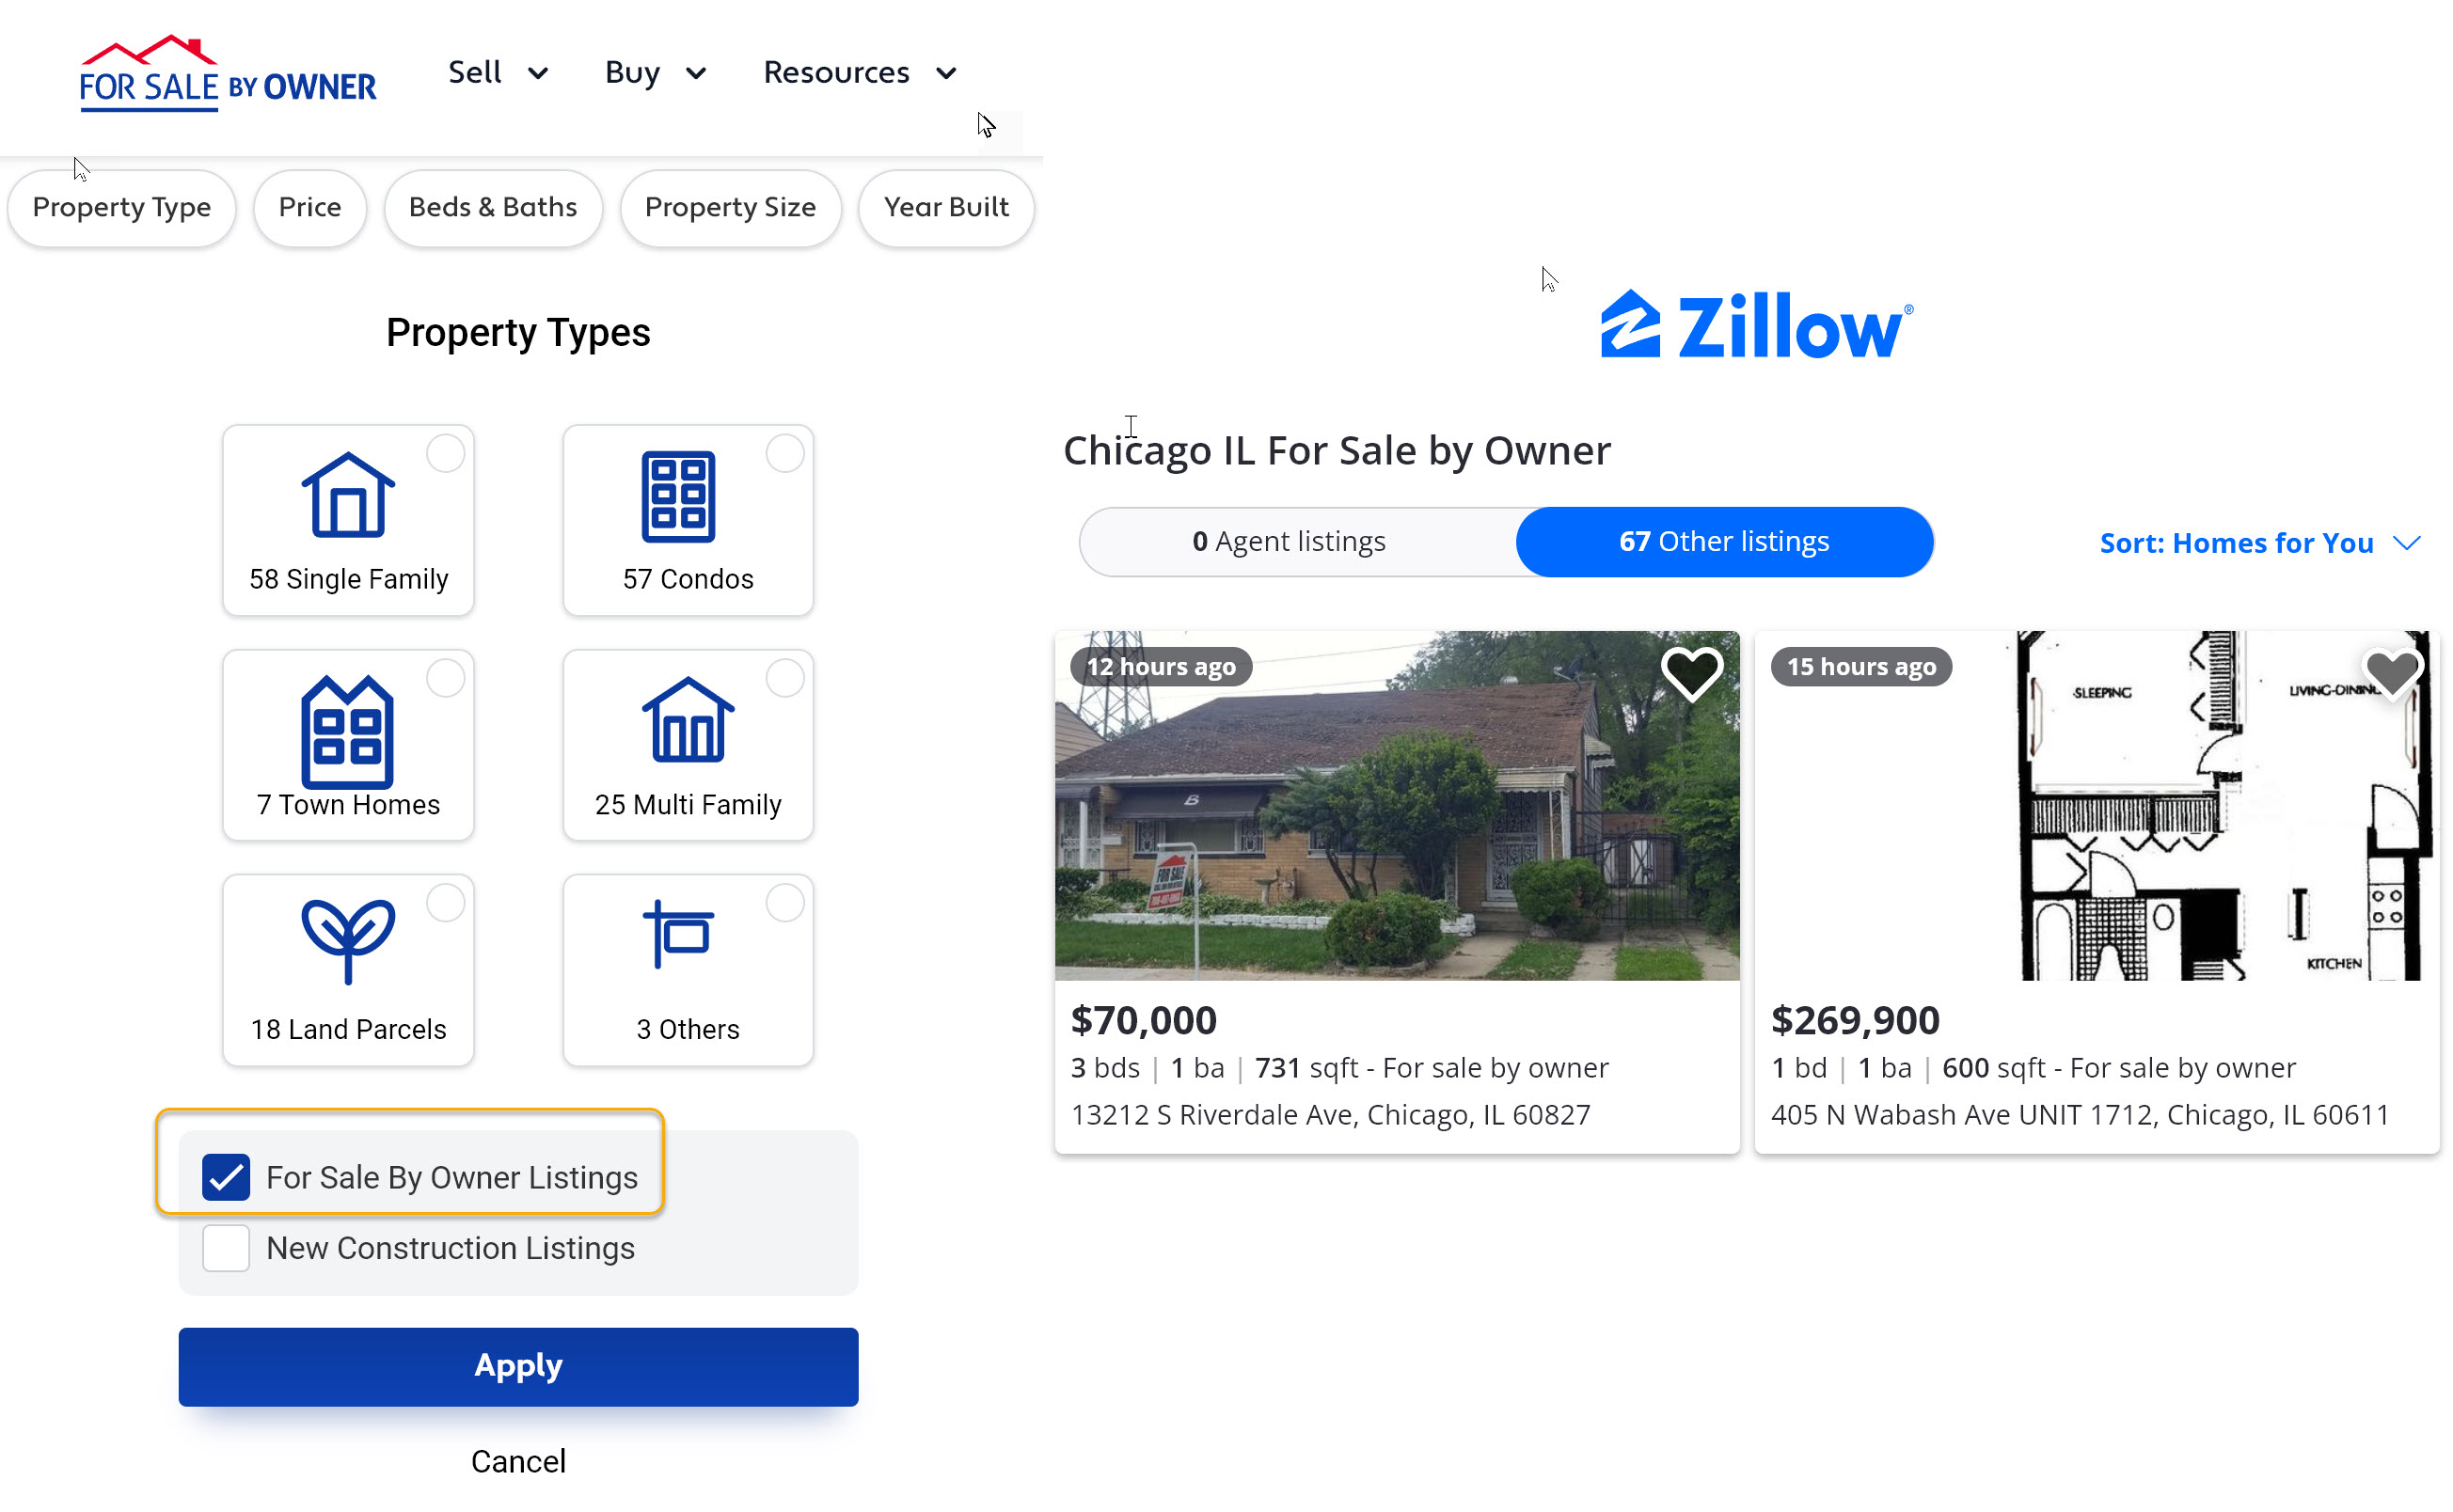 Filtering options to find for sale by owner home listings in Zillow and other sites